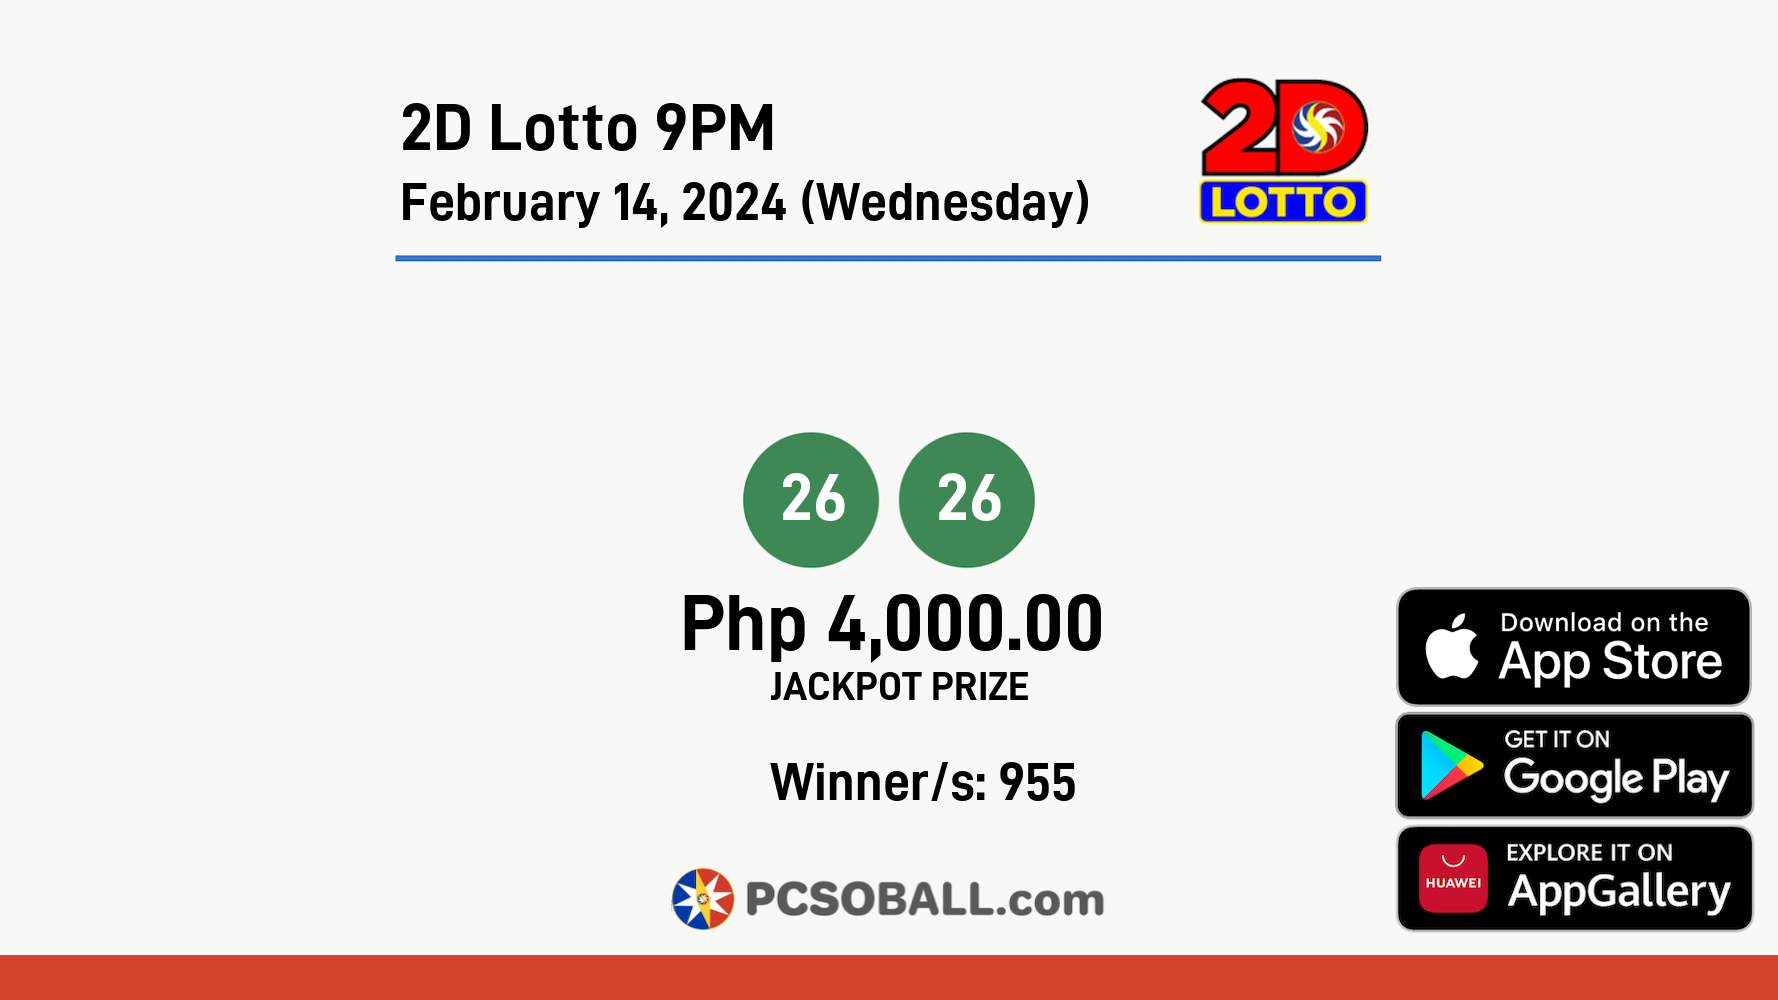 2D Lotto 9PM February 14, 2024 (Wednesday) Result